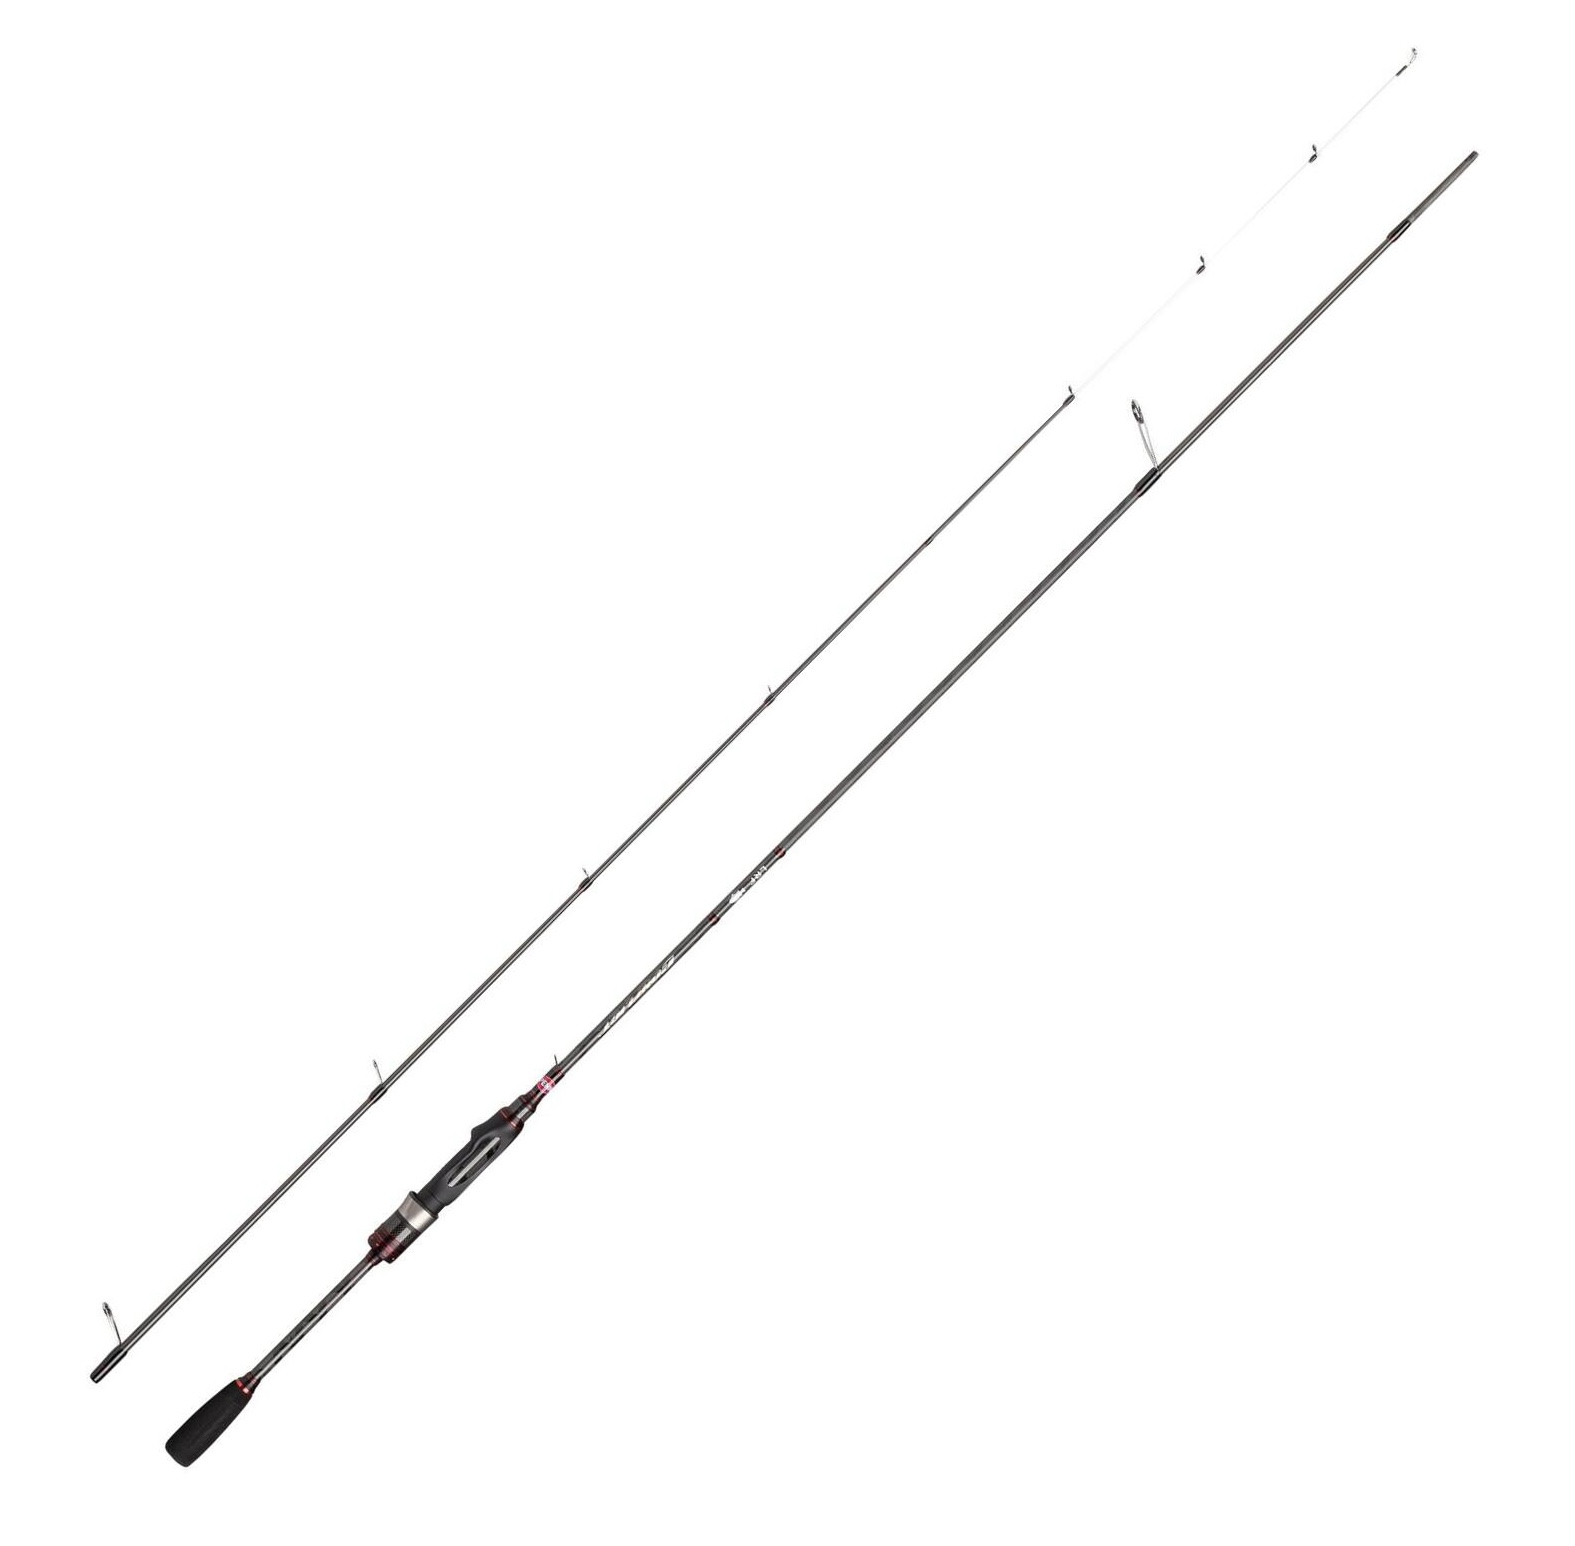 Canna Spinning Penn Conflict LRF Solid Tip 7'6” 0.2-5 g 2 pz